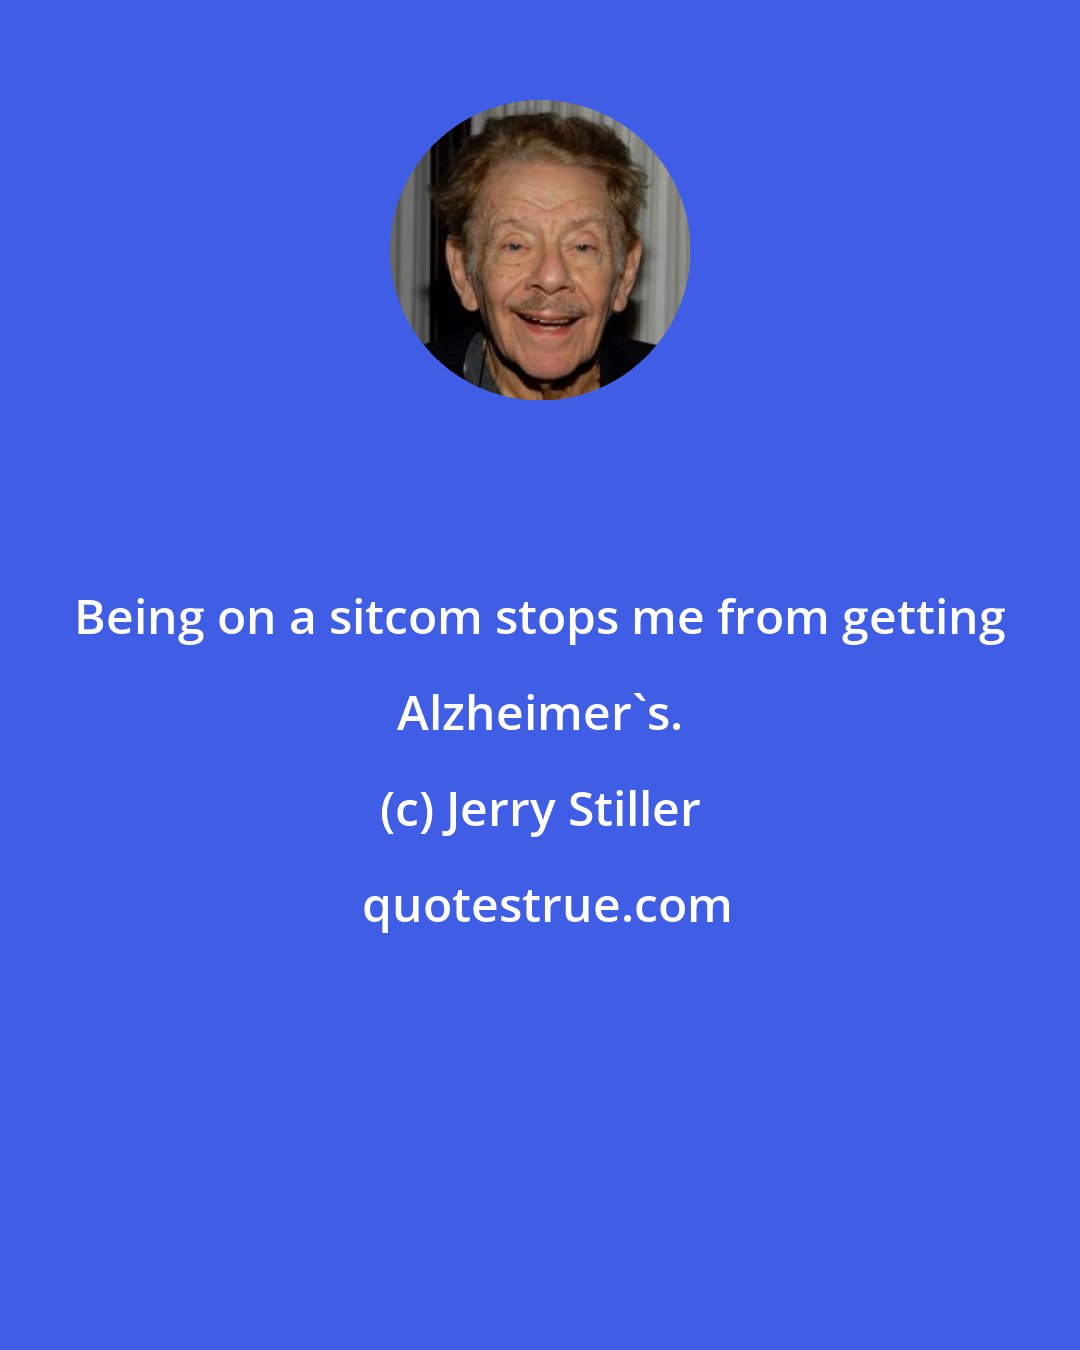 Jerry Stiller: Being on a sitcom stops me from getting Alzheimer's.